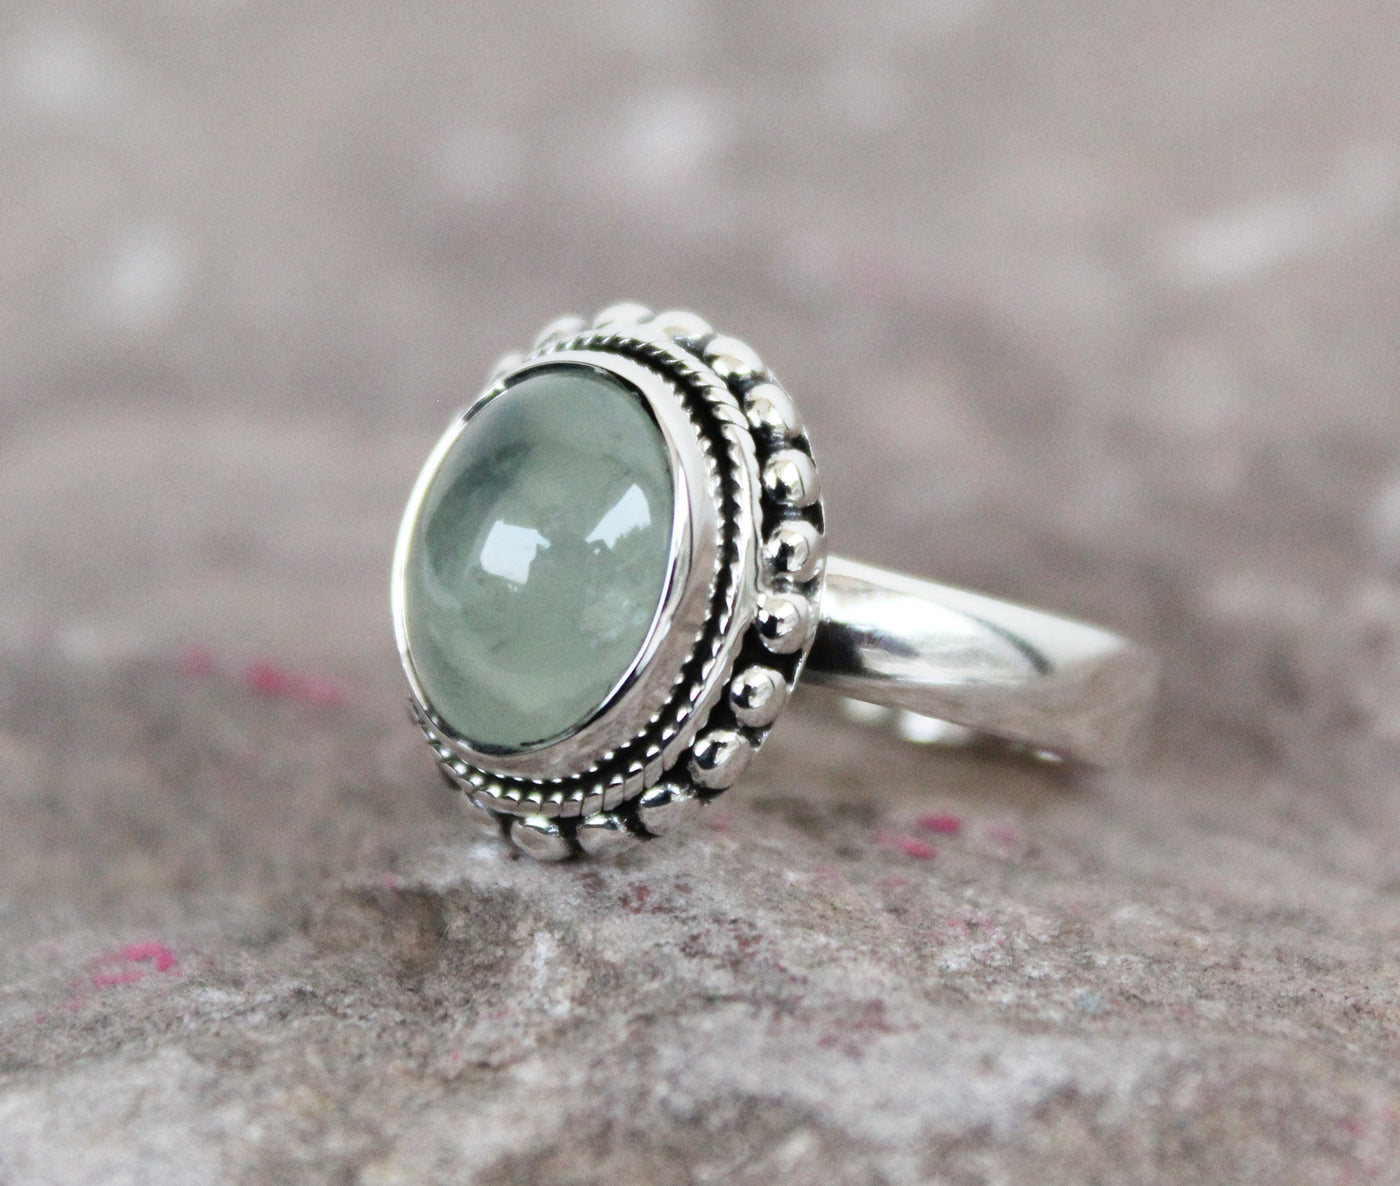 Prehnite Ring, 925 Sterling Silver Ring, 12x16mm Oval Prehnite Ring, Handmade Ring, Green Gemstone Ring, Women's Ring,Statement Ring, Ring